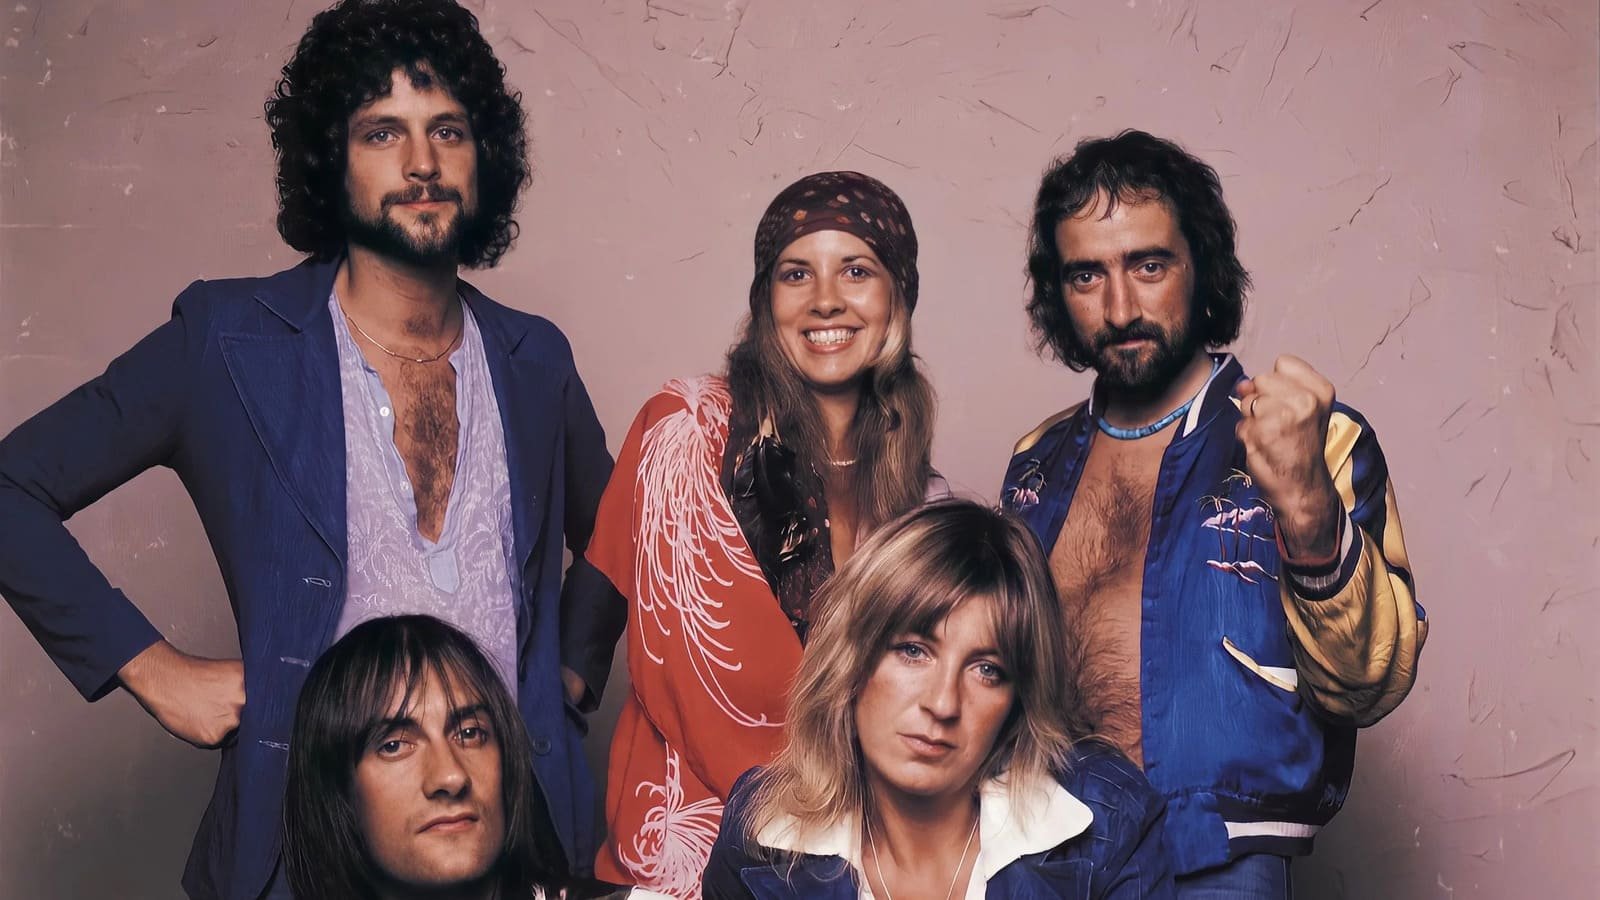 Which song made a fortune to Fleetwood Mac?